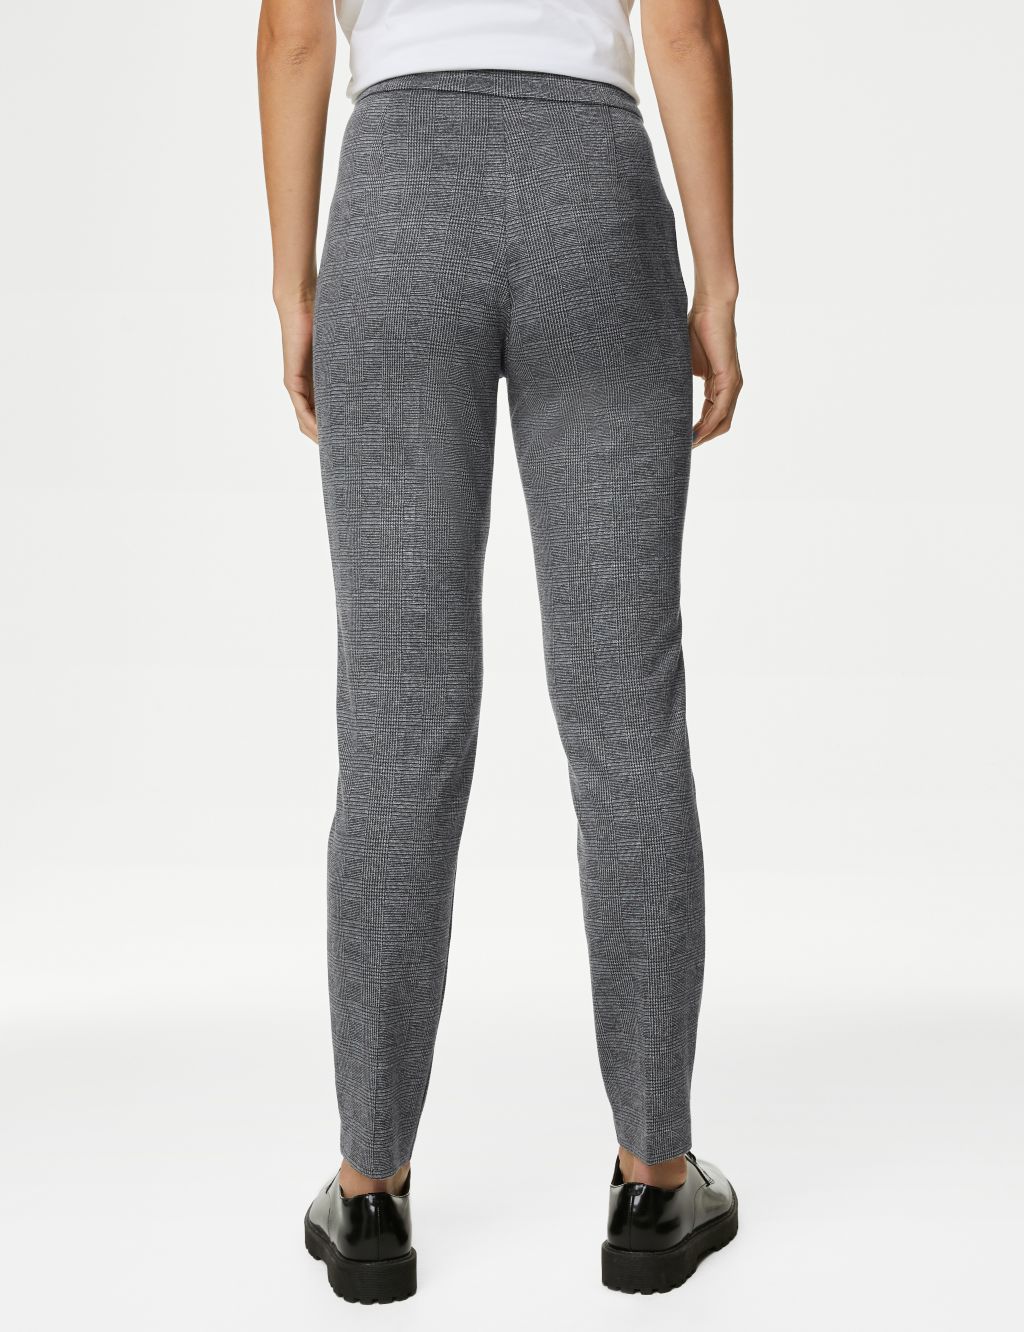 Jersey Checked Slim Fit Trousers image 4